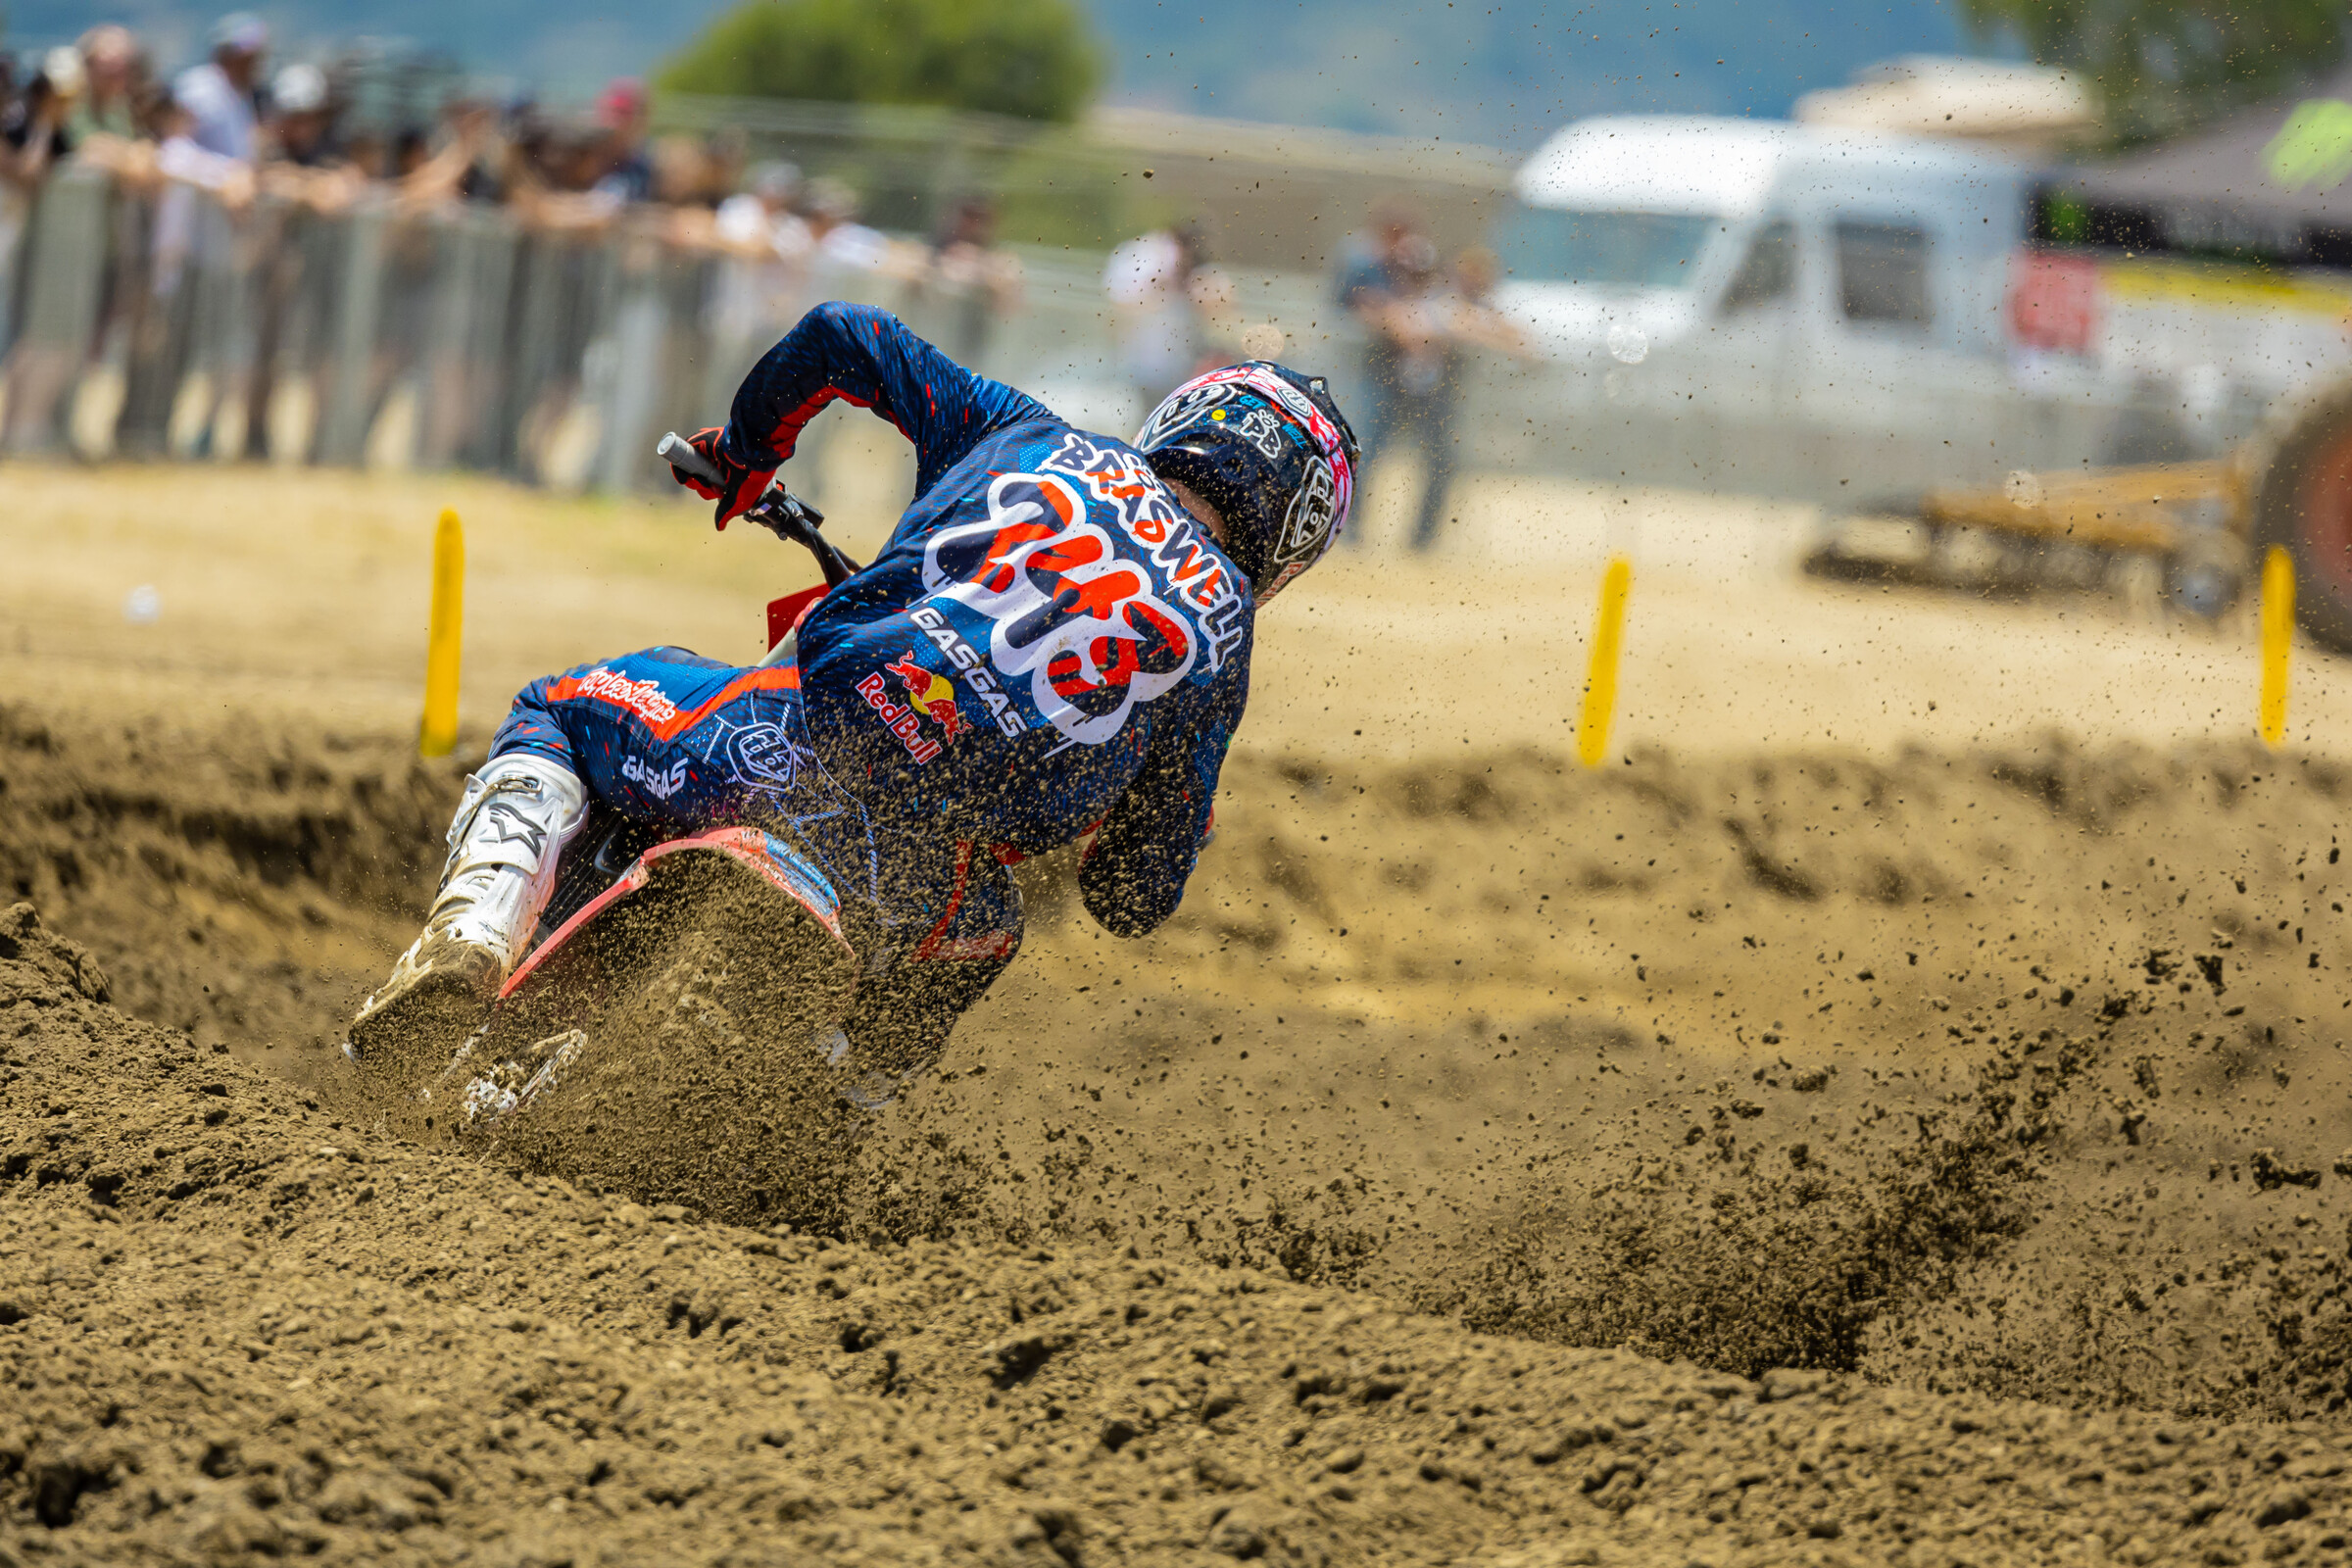 Caden Braswell Gets a Troy Lee Designs/Red Bull/GasGas Ride - Racer X